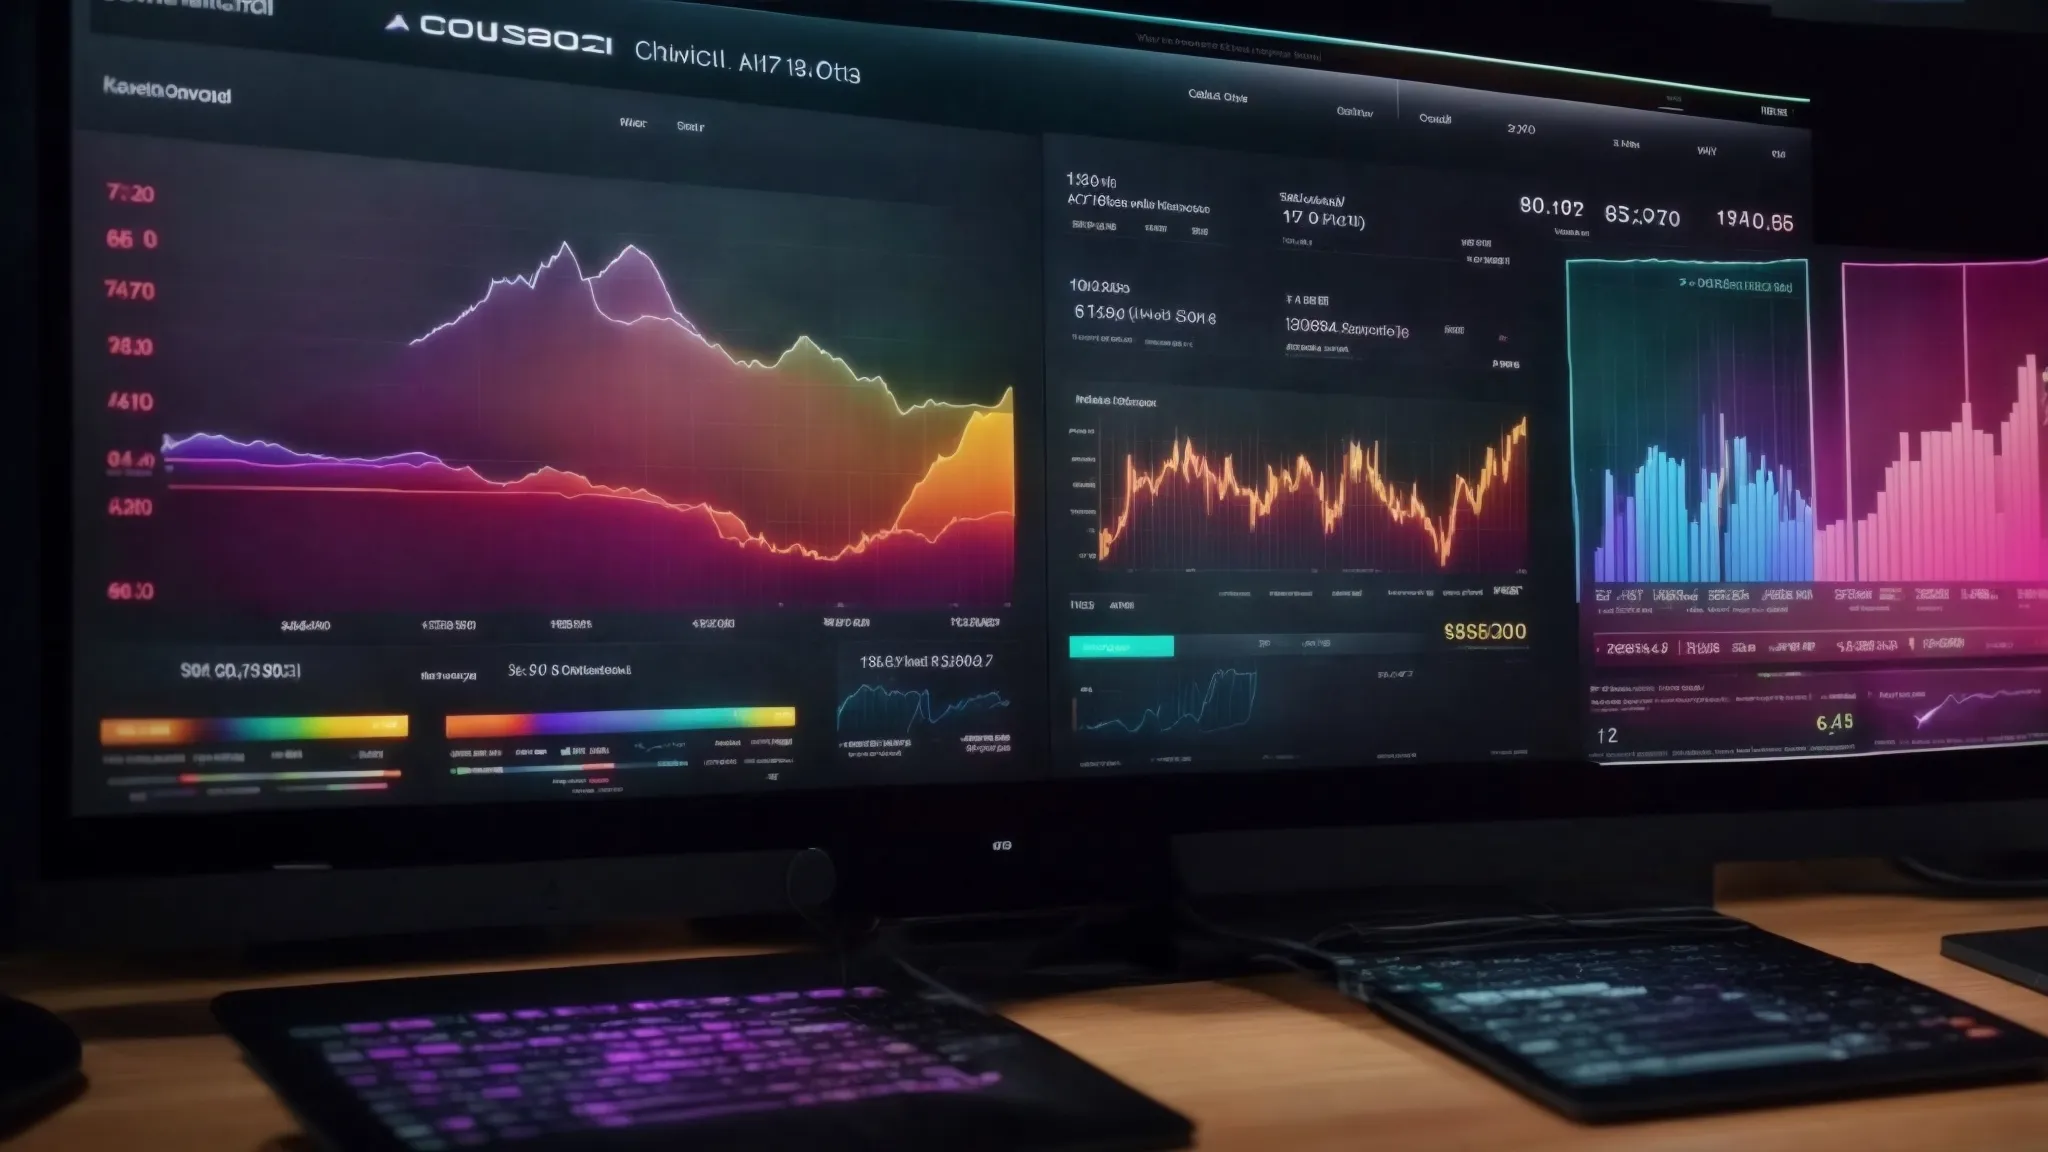 a colorful and interactive seo dashboard displaying graphs and trends dominating a computer screen.